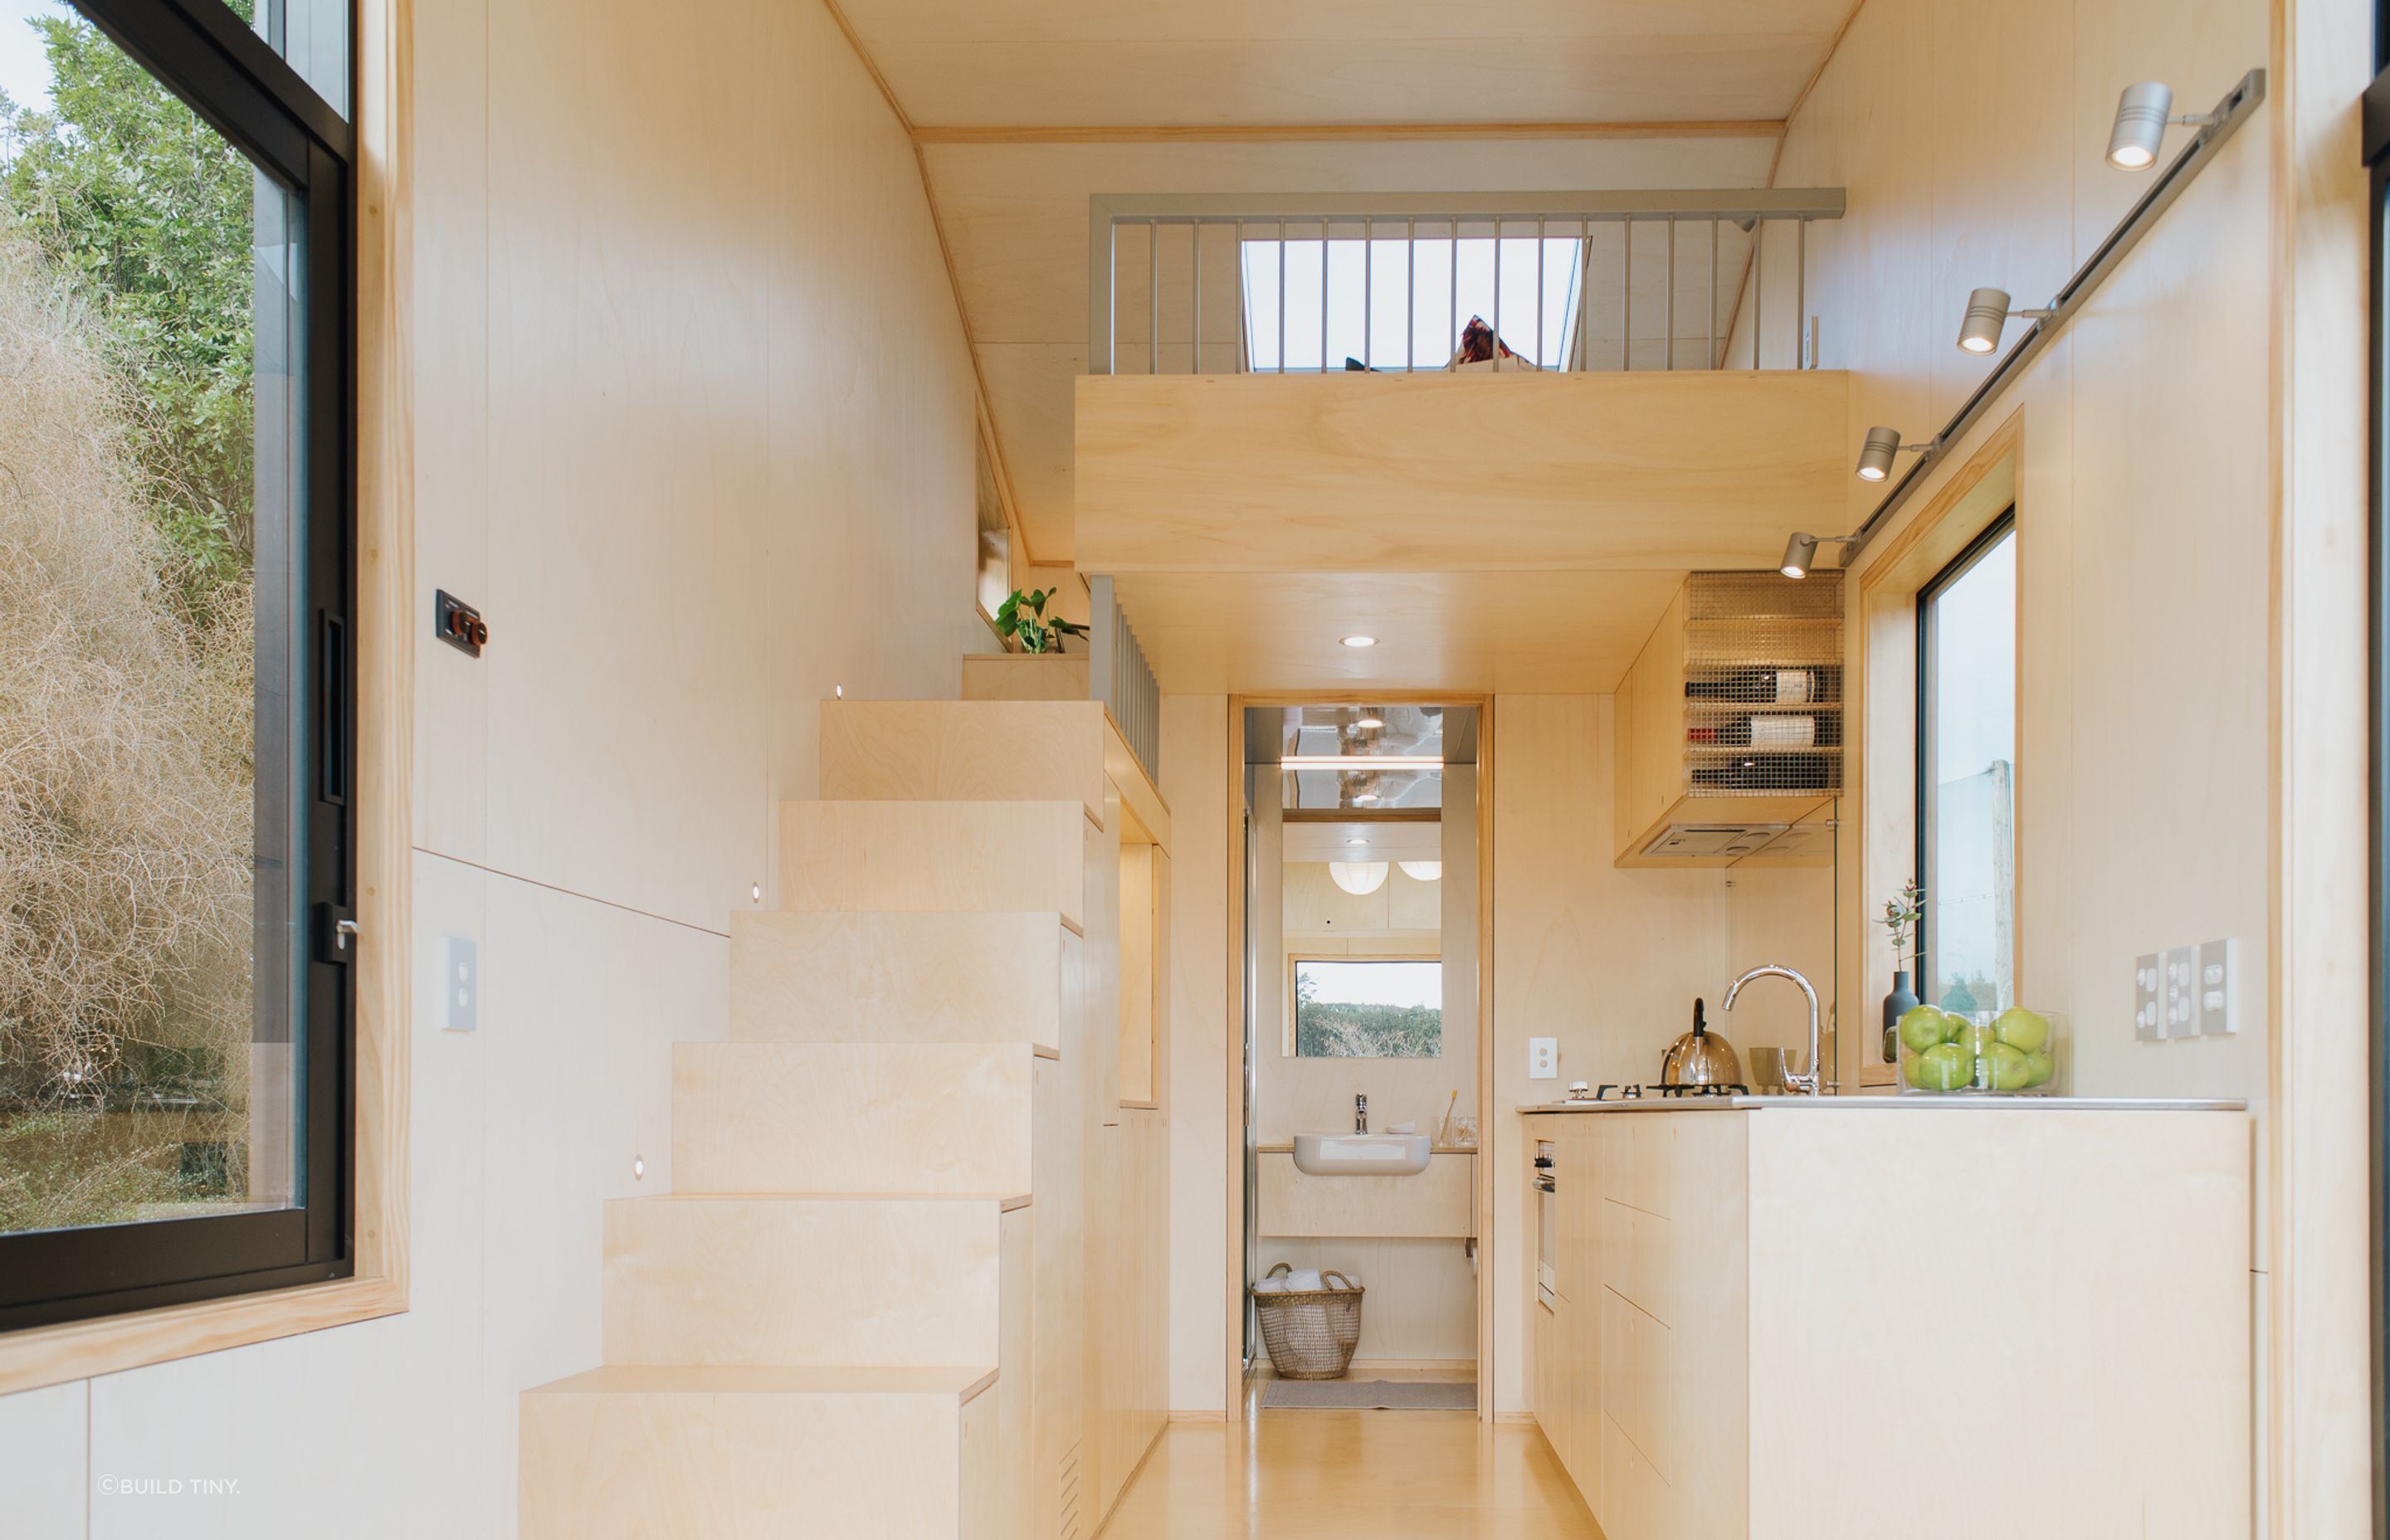 The light-coloured Poplar plywood-lined interior helps to give the interior a warm and spacious feel. Photography supplied by Build Tiny.